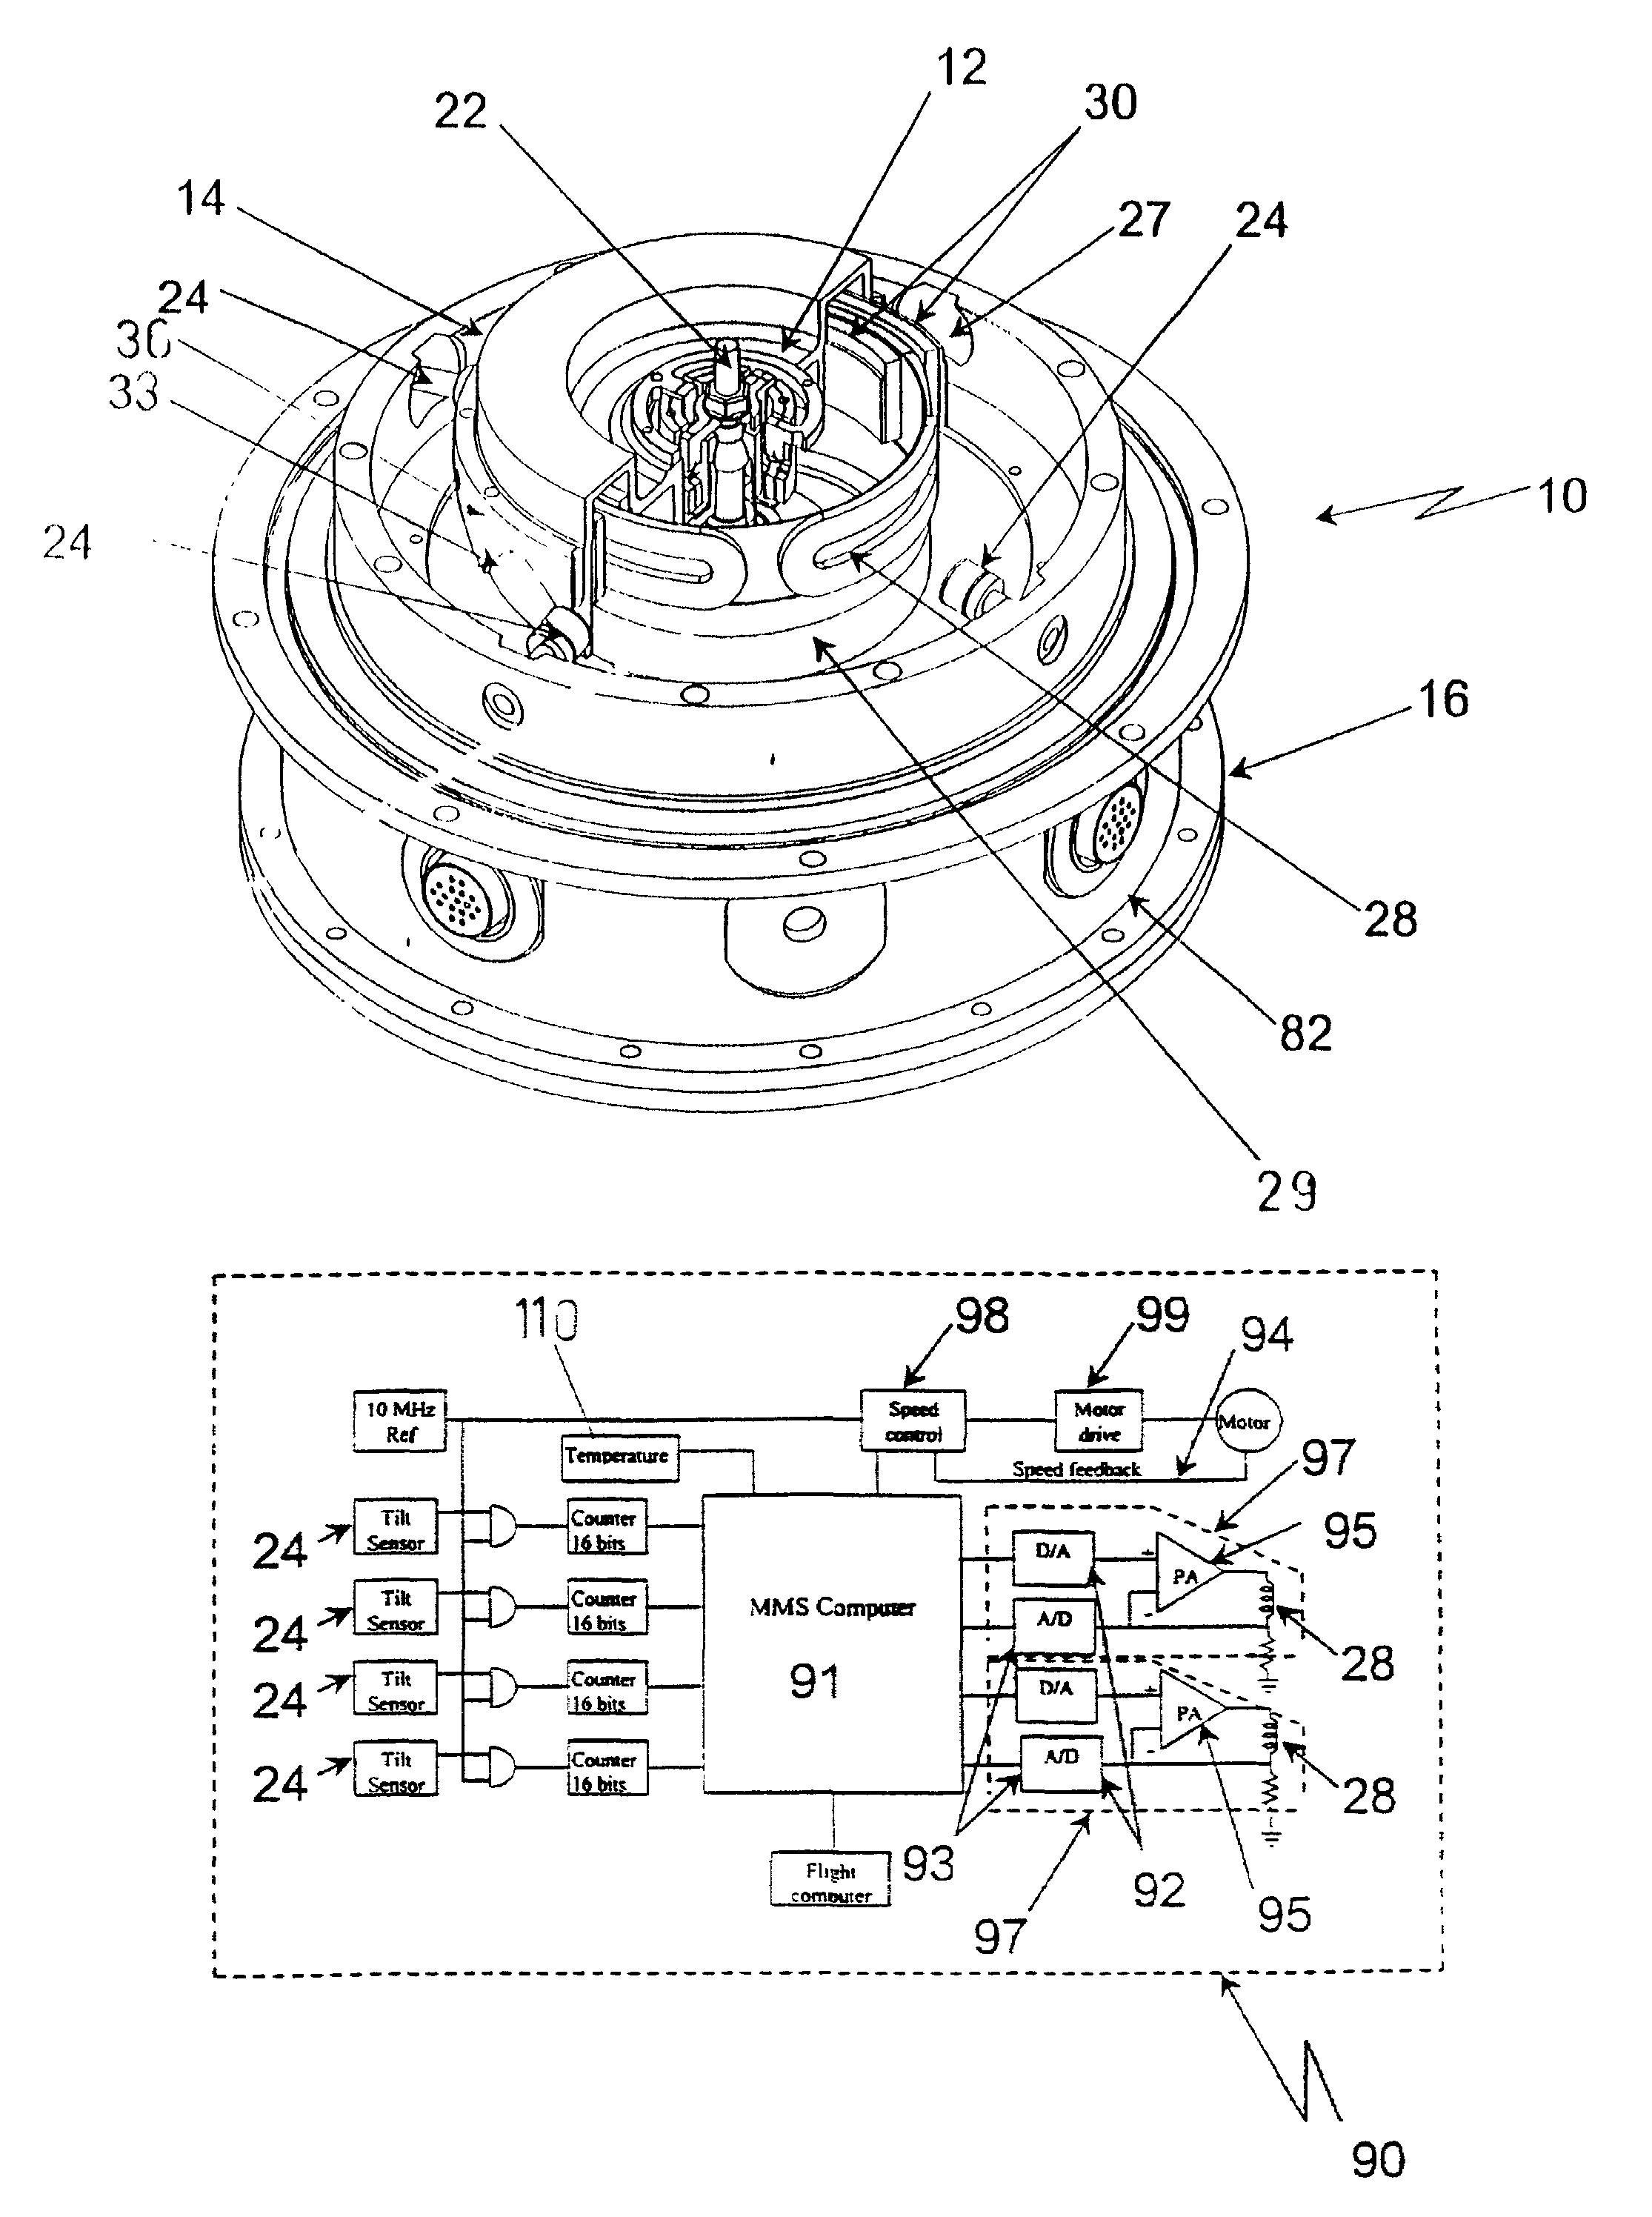 System and method for spacecraft attitude control